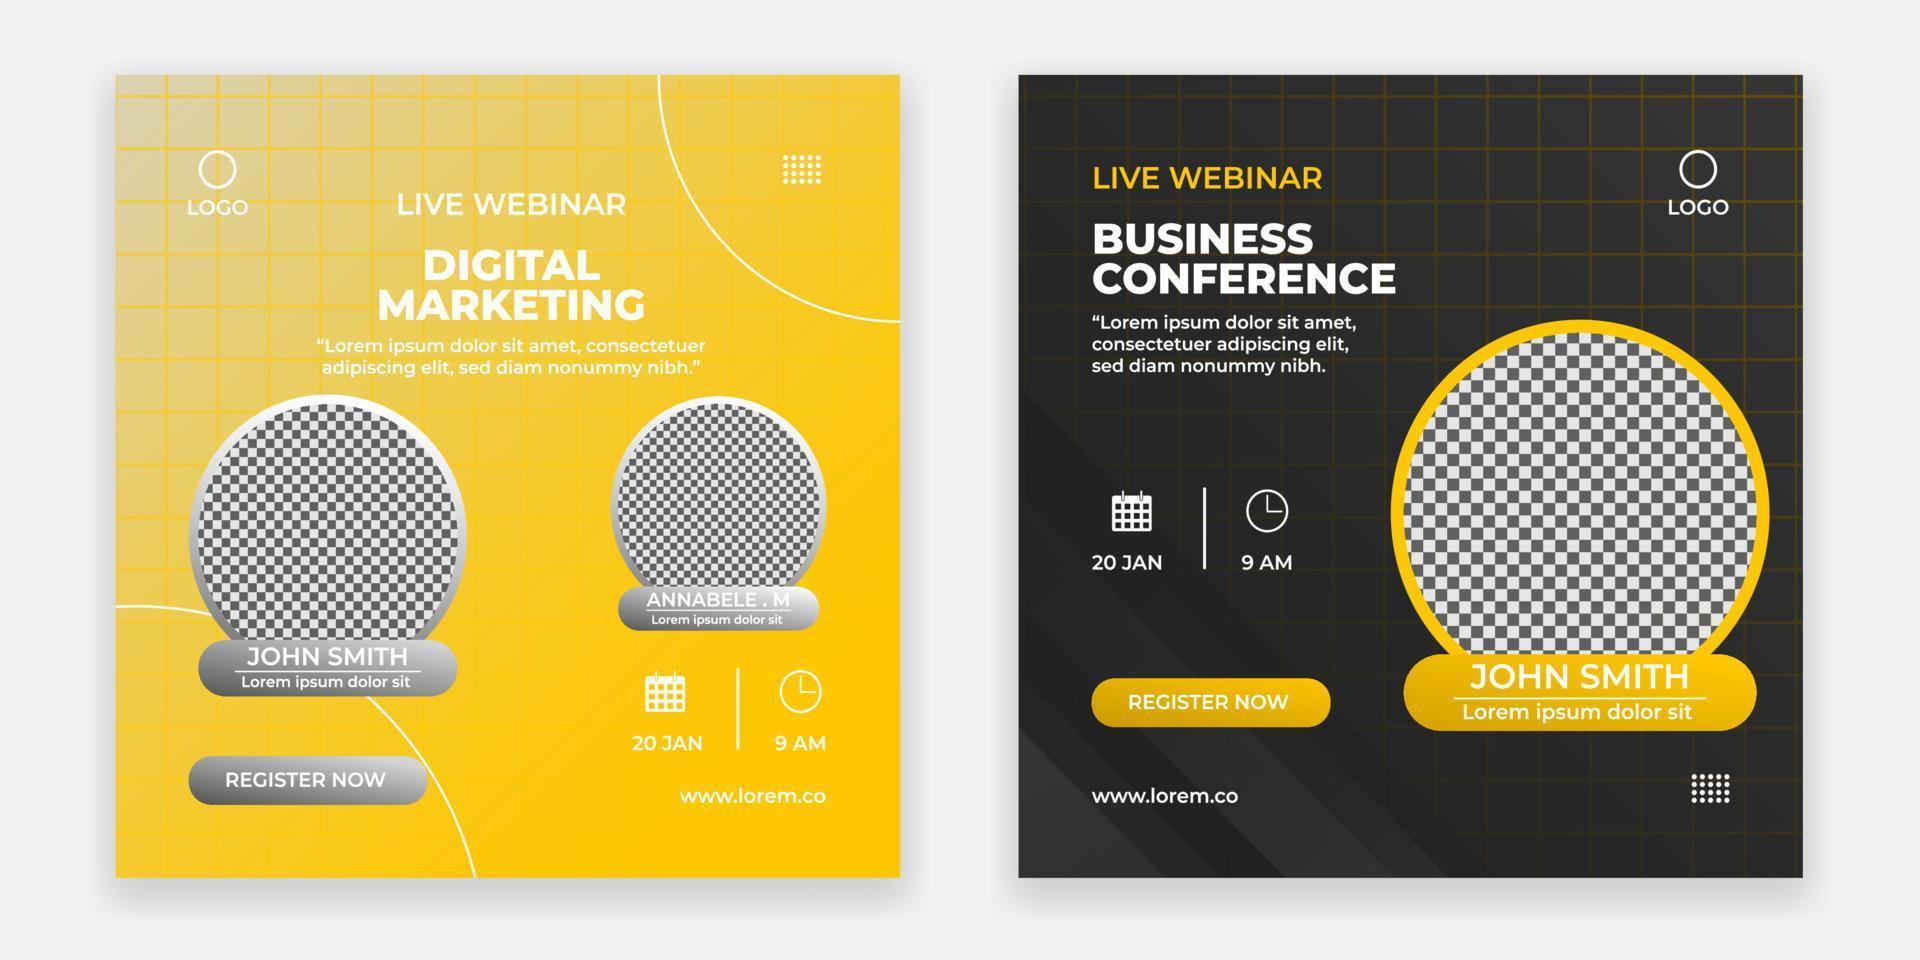 Live webinar template, social media post template. Digital marketing for business promotion. Modern colorful business template. vector